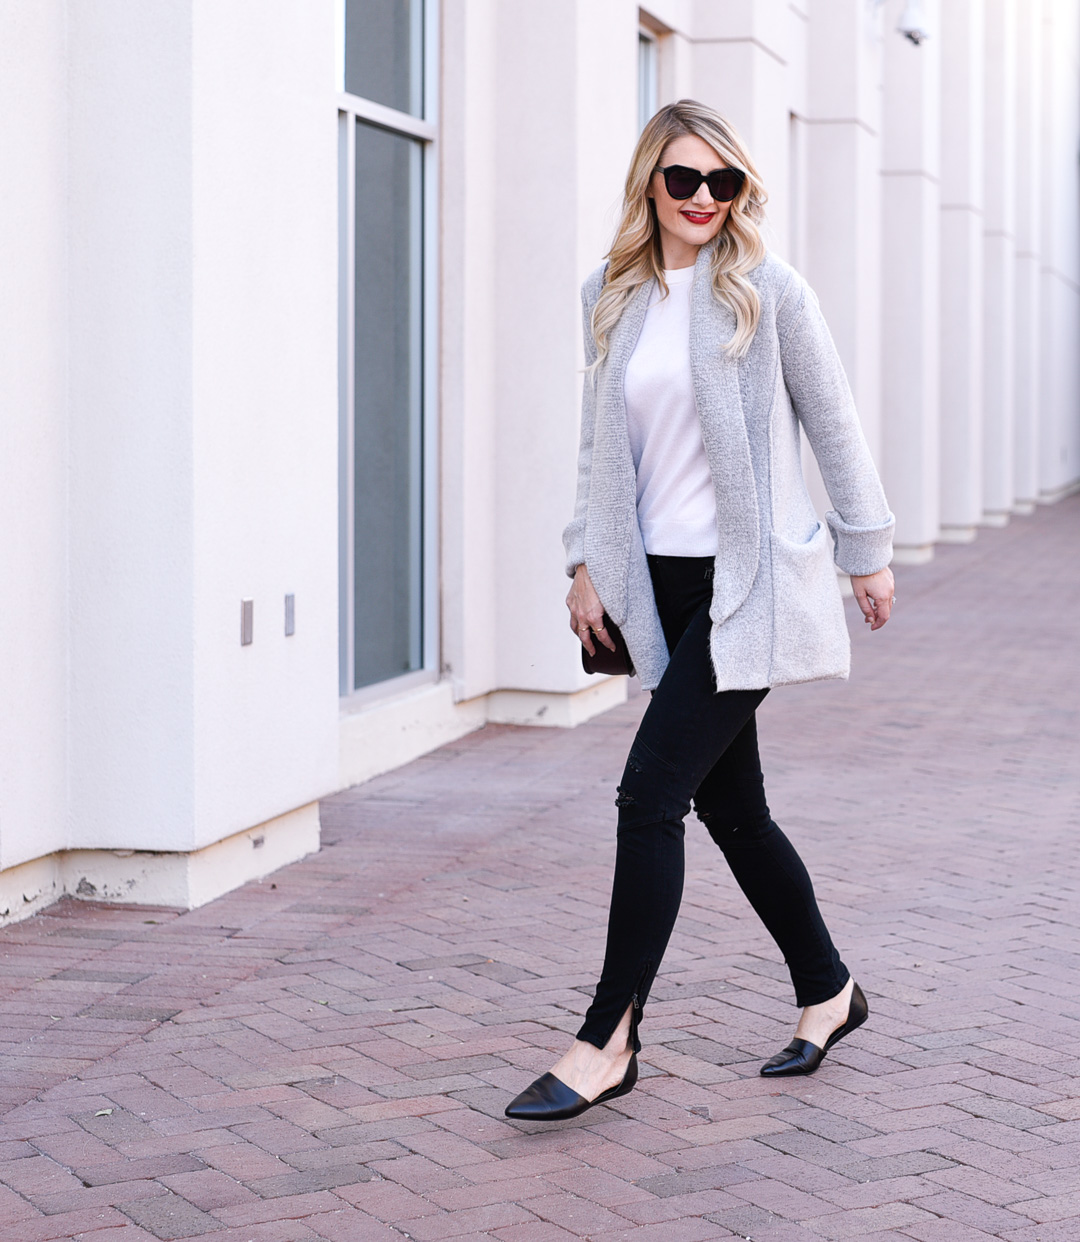 Jenna Colgrove wearing a grey cardigan sweater, black skinny jeans, and black leather flats. 